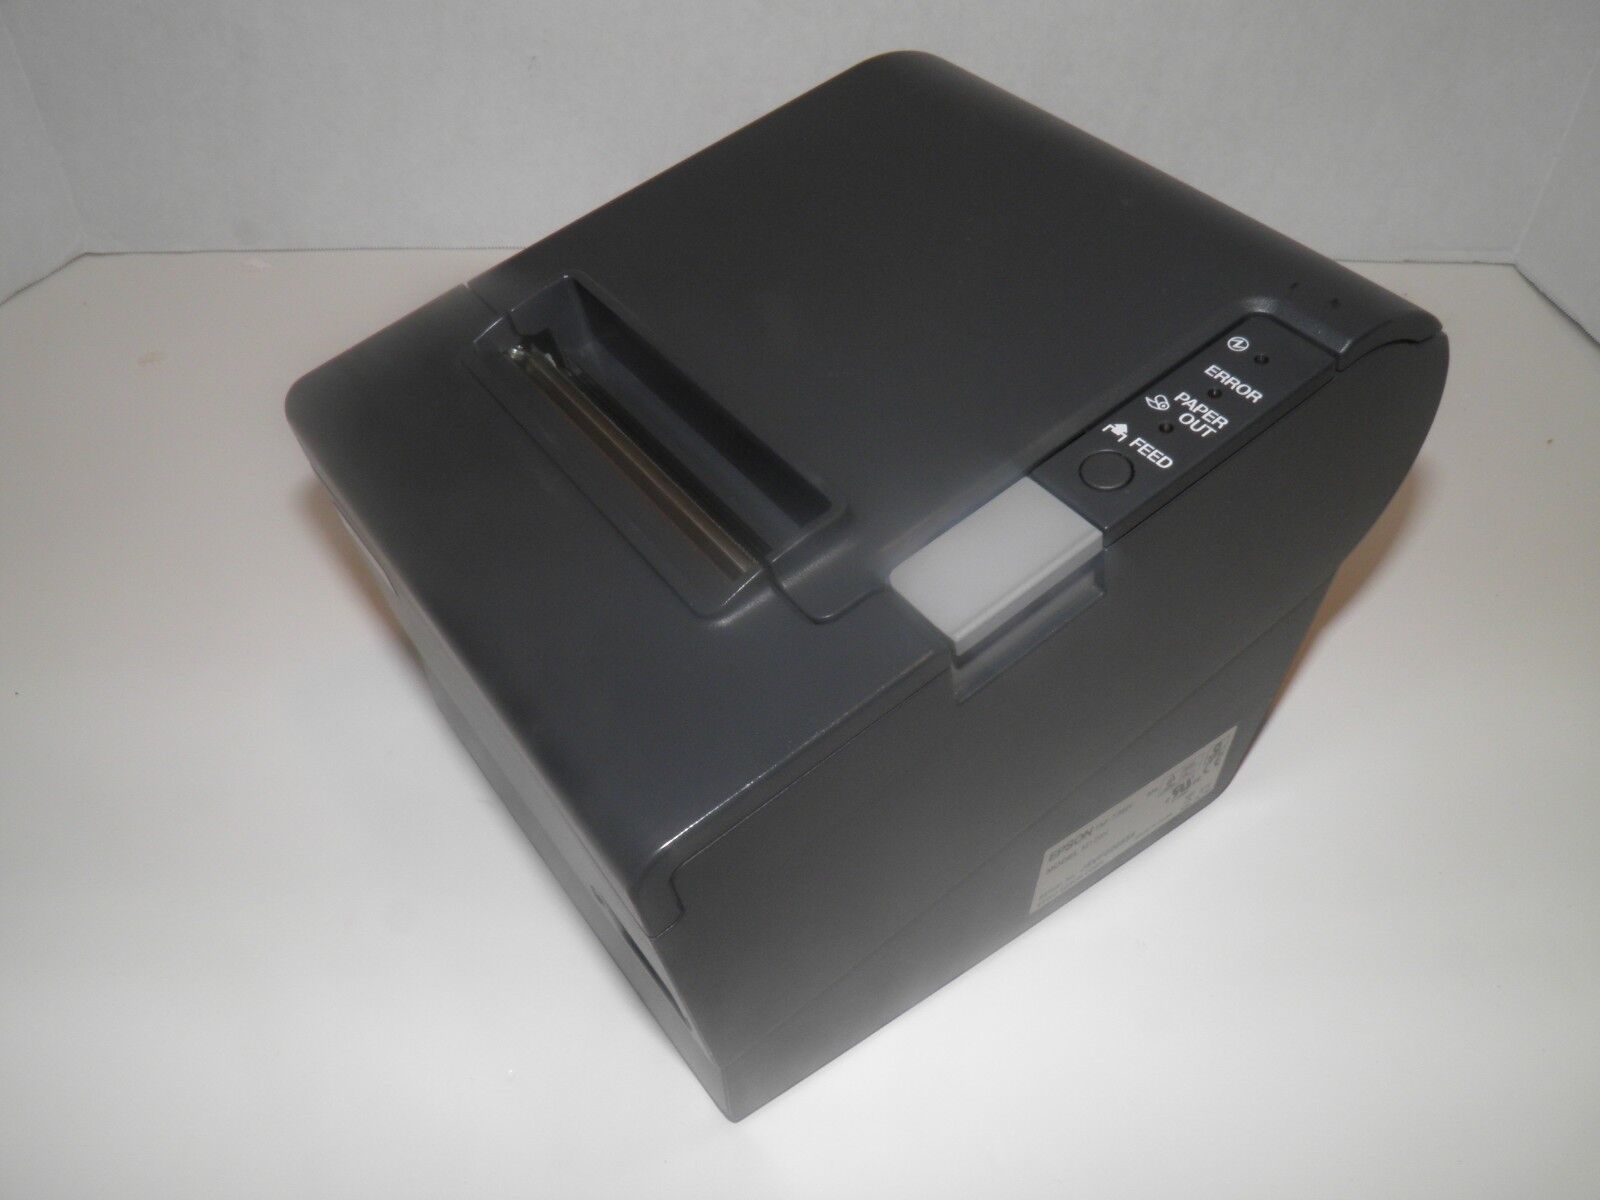 Primary image for Epson TM-T88IV M129H  Thermal POS Receipt Printer Parallel